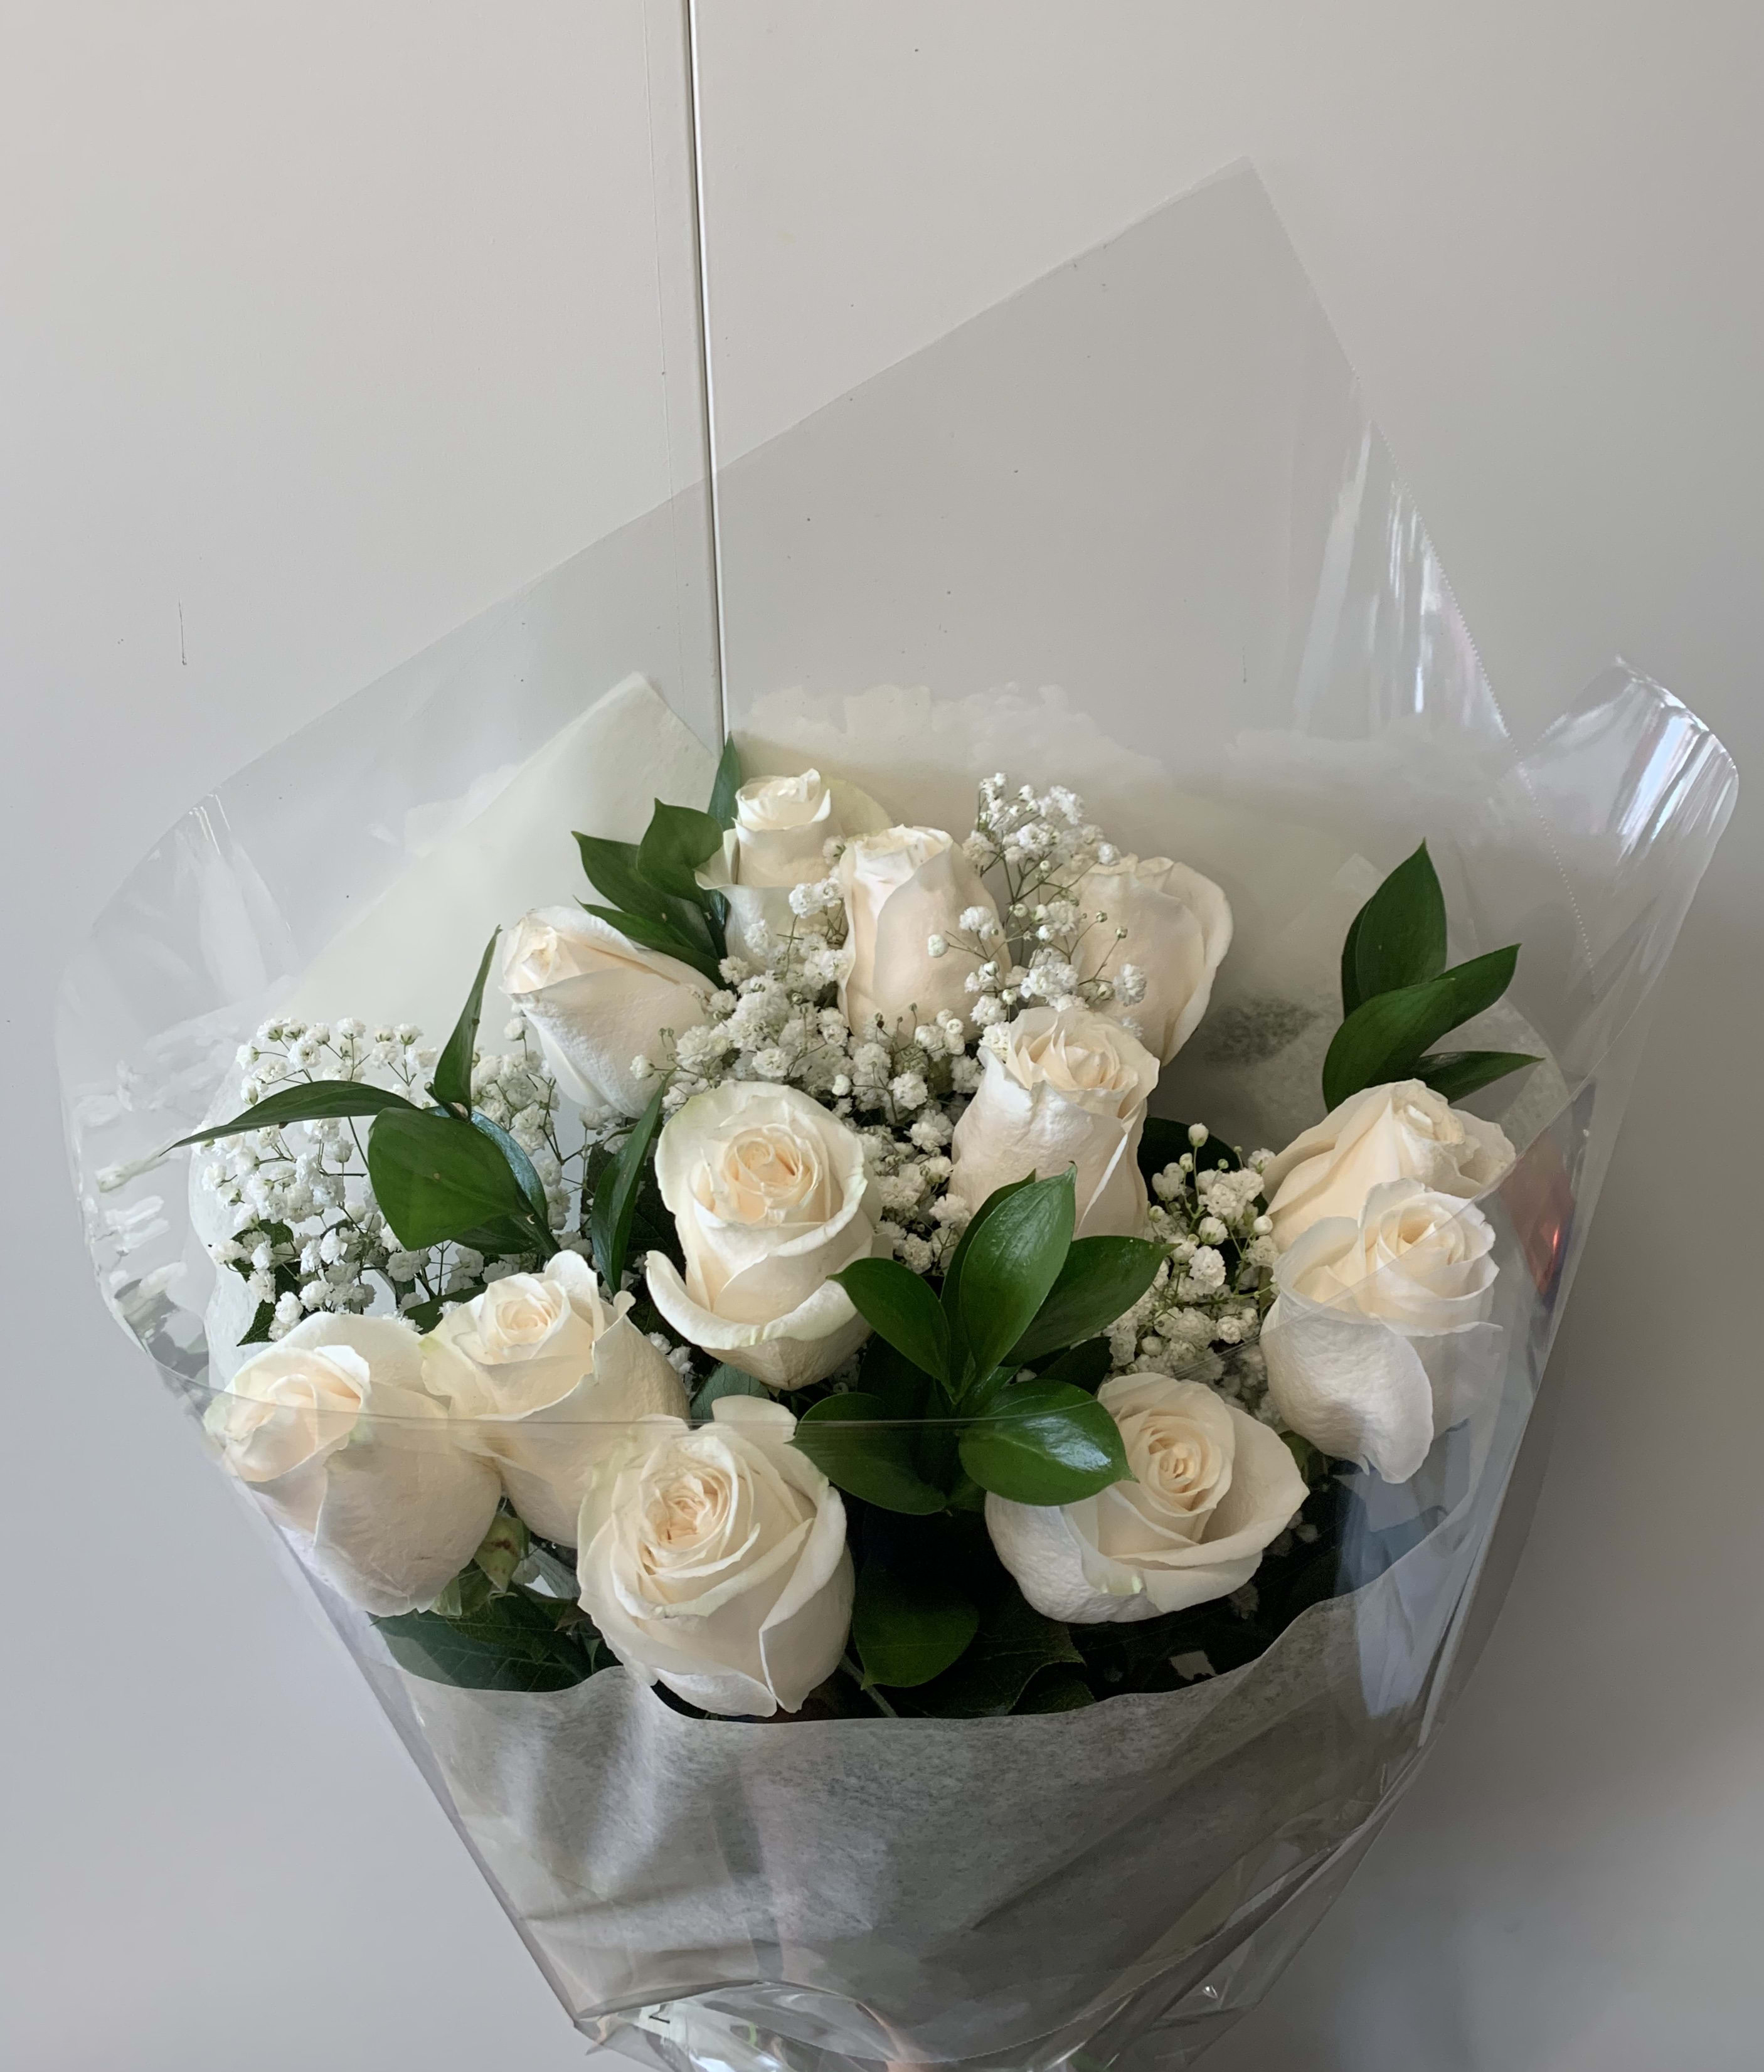 White roses bouquet